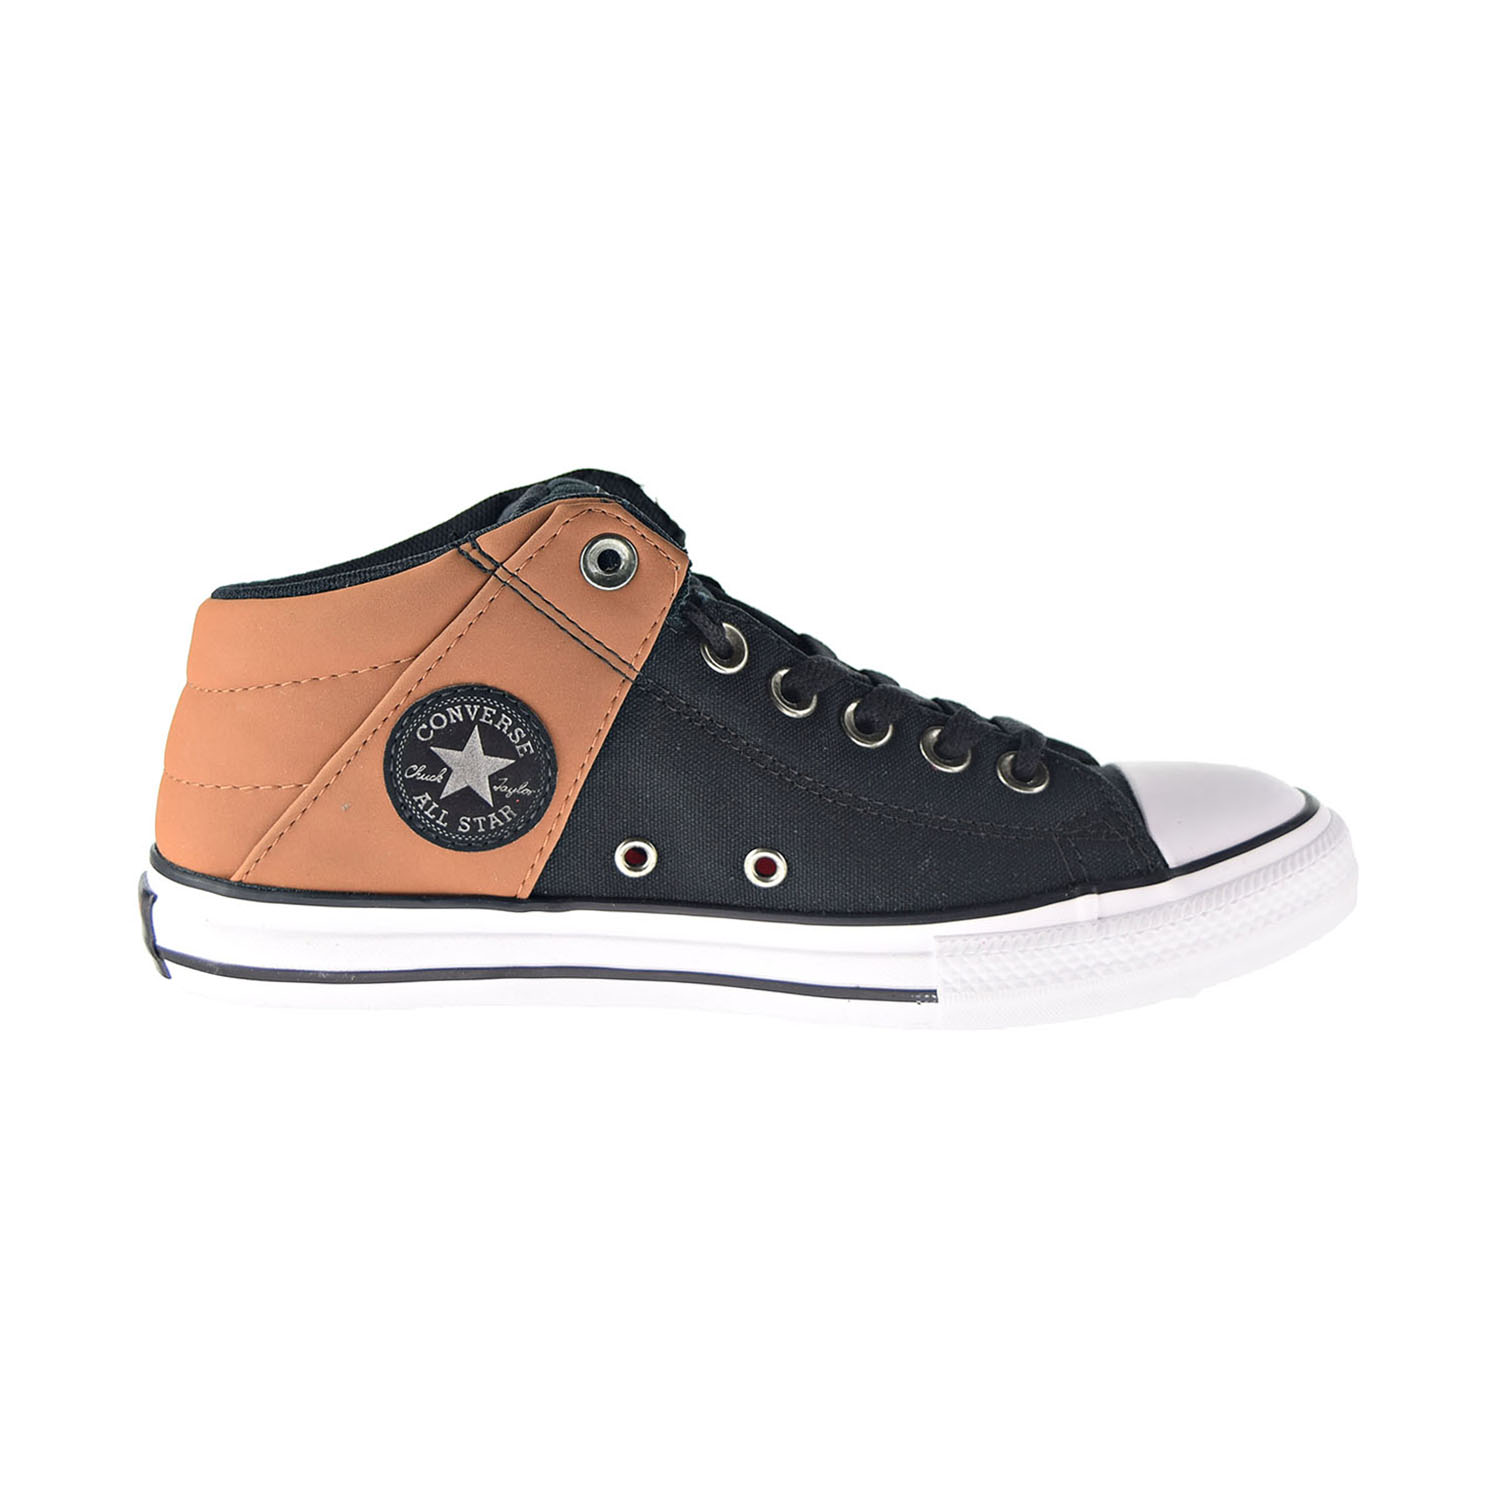 Converse Chuck Taylor All Star Axel Mid Kids' Shoes Black-Warm Tan-White 666065f - image 1 of 6